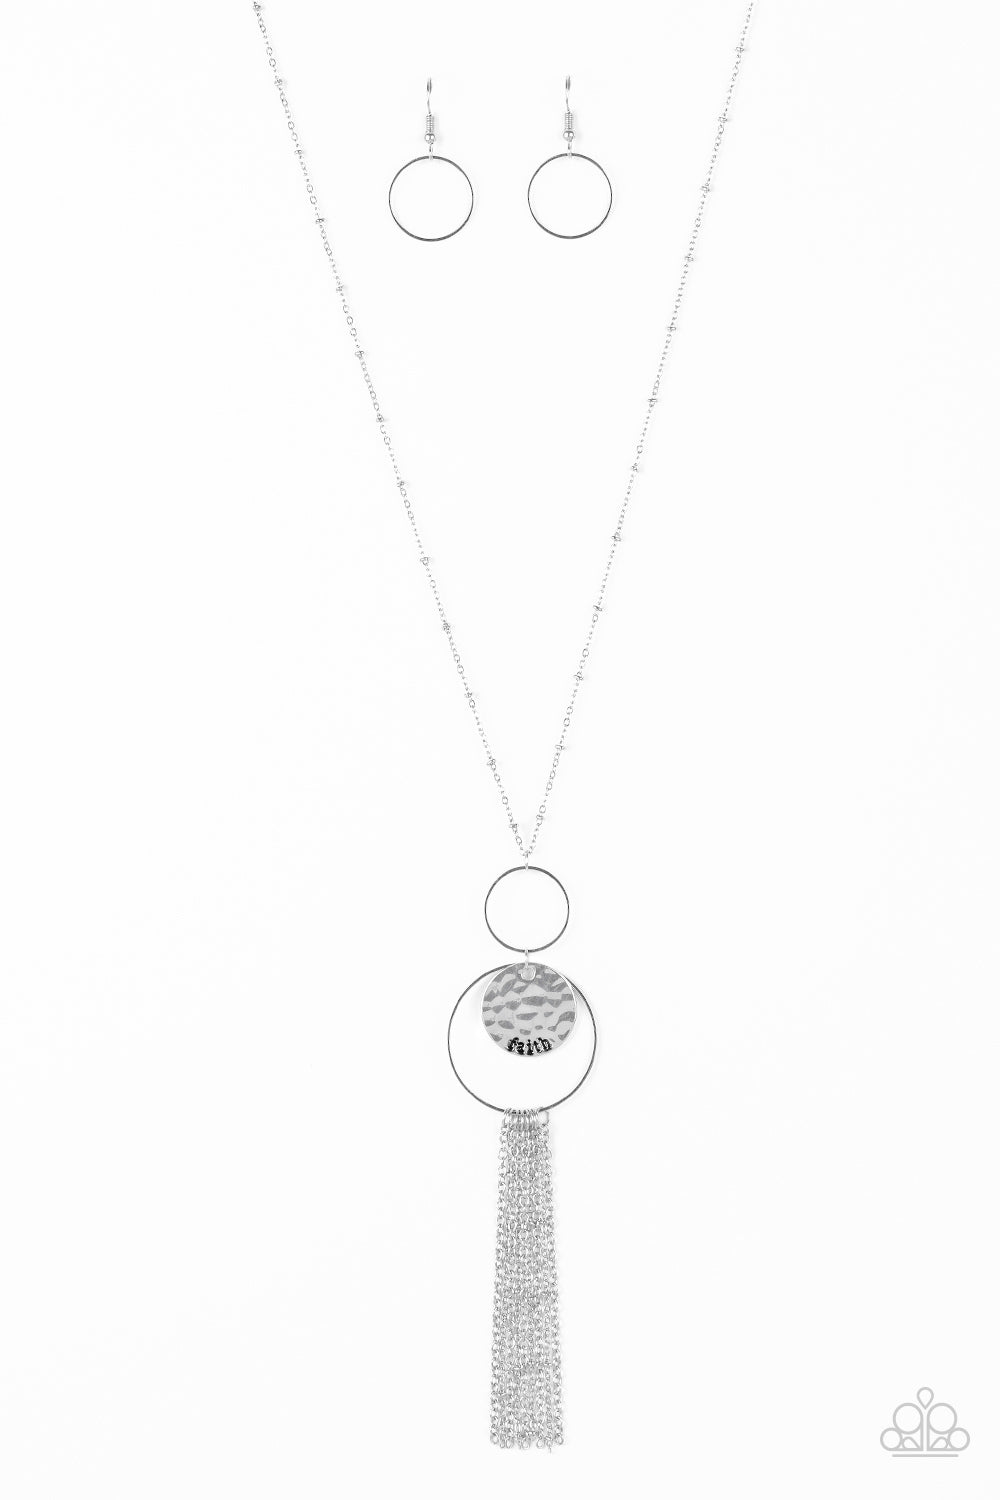 Faith Makes All Things Possible - Silver Necklace